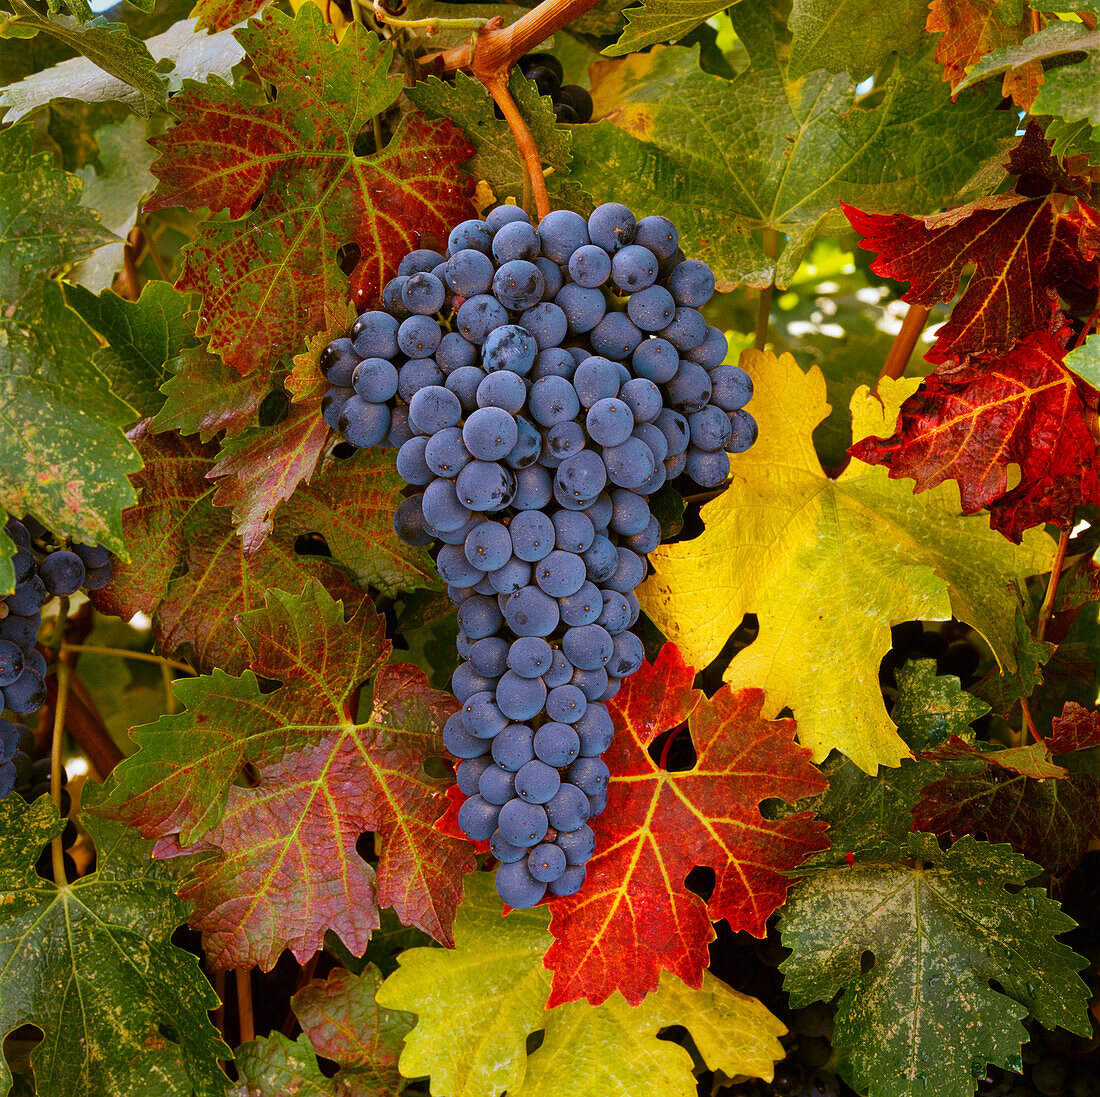 Agriculture - Mature Cabernet Sauvignon wine grapes on the vine, ready for the harvest / Monterey County, California, USA.